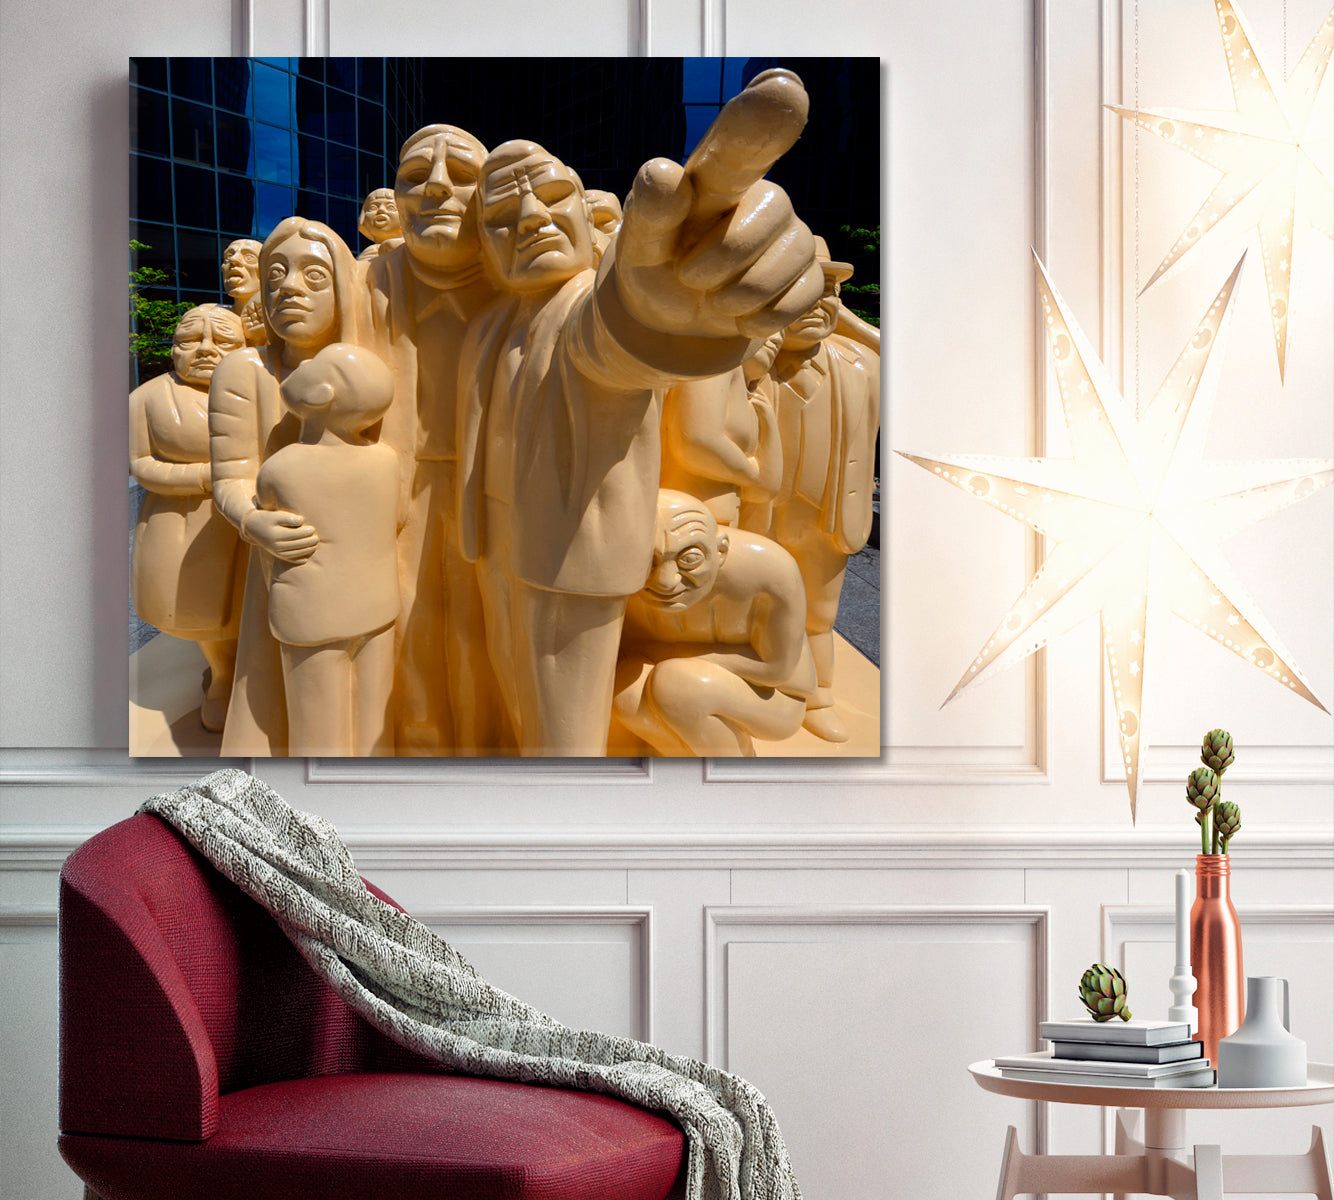 ILLUMINATED CROWD Montreal Canada Urban Architecture - S Cities Wall Art Artesty 1 Panel 12"x12" 